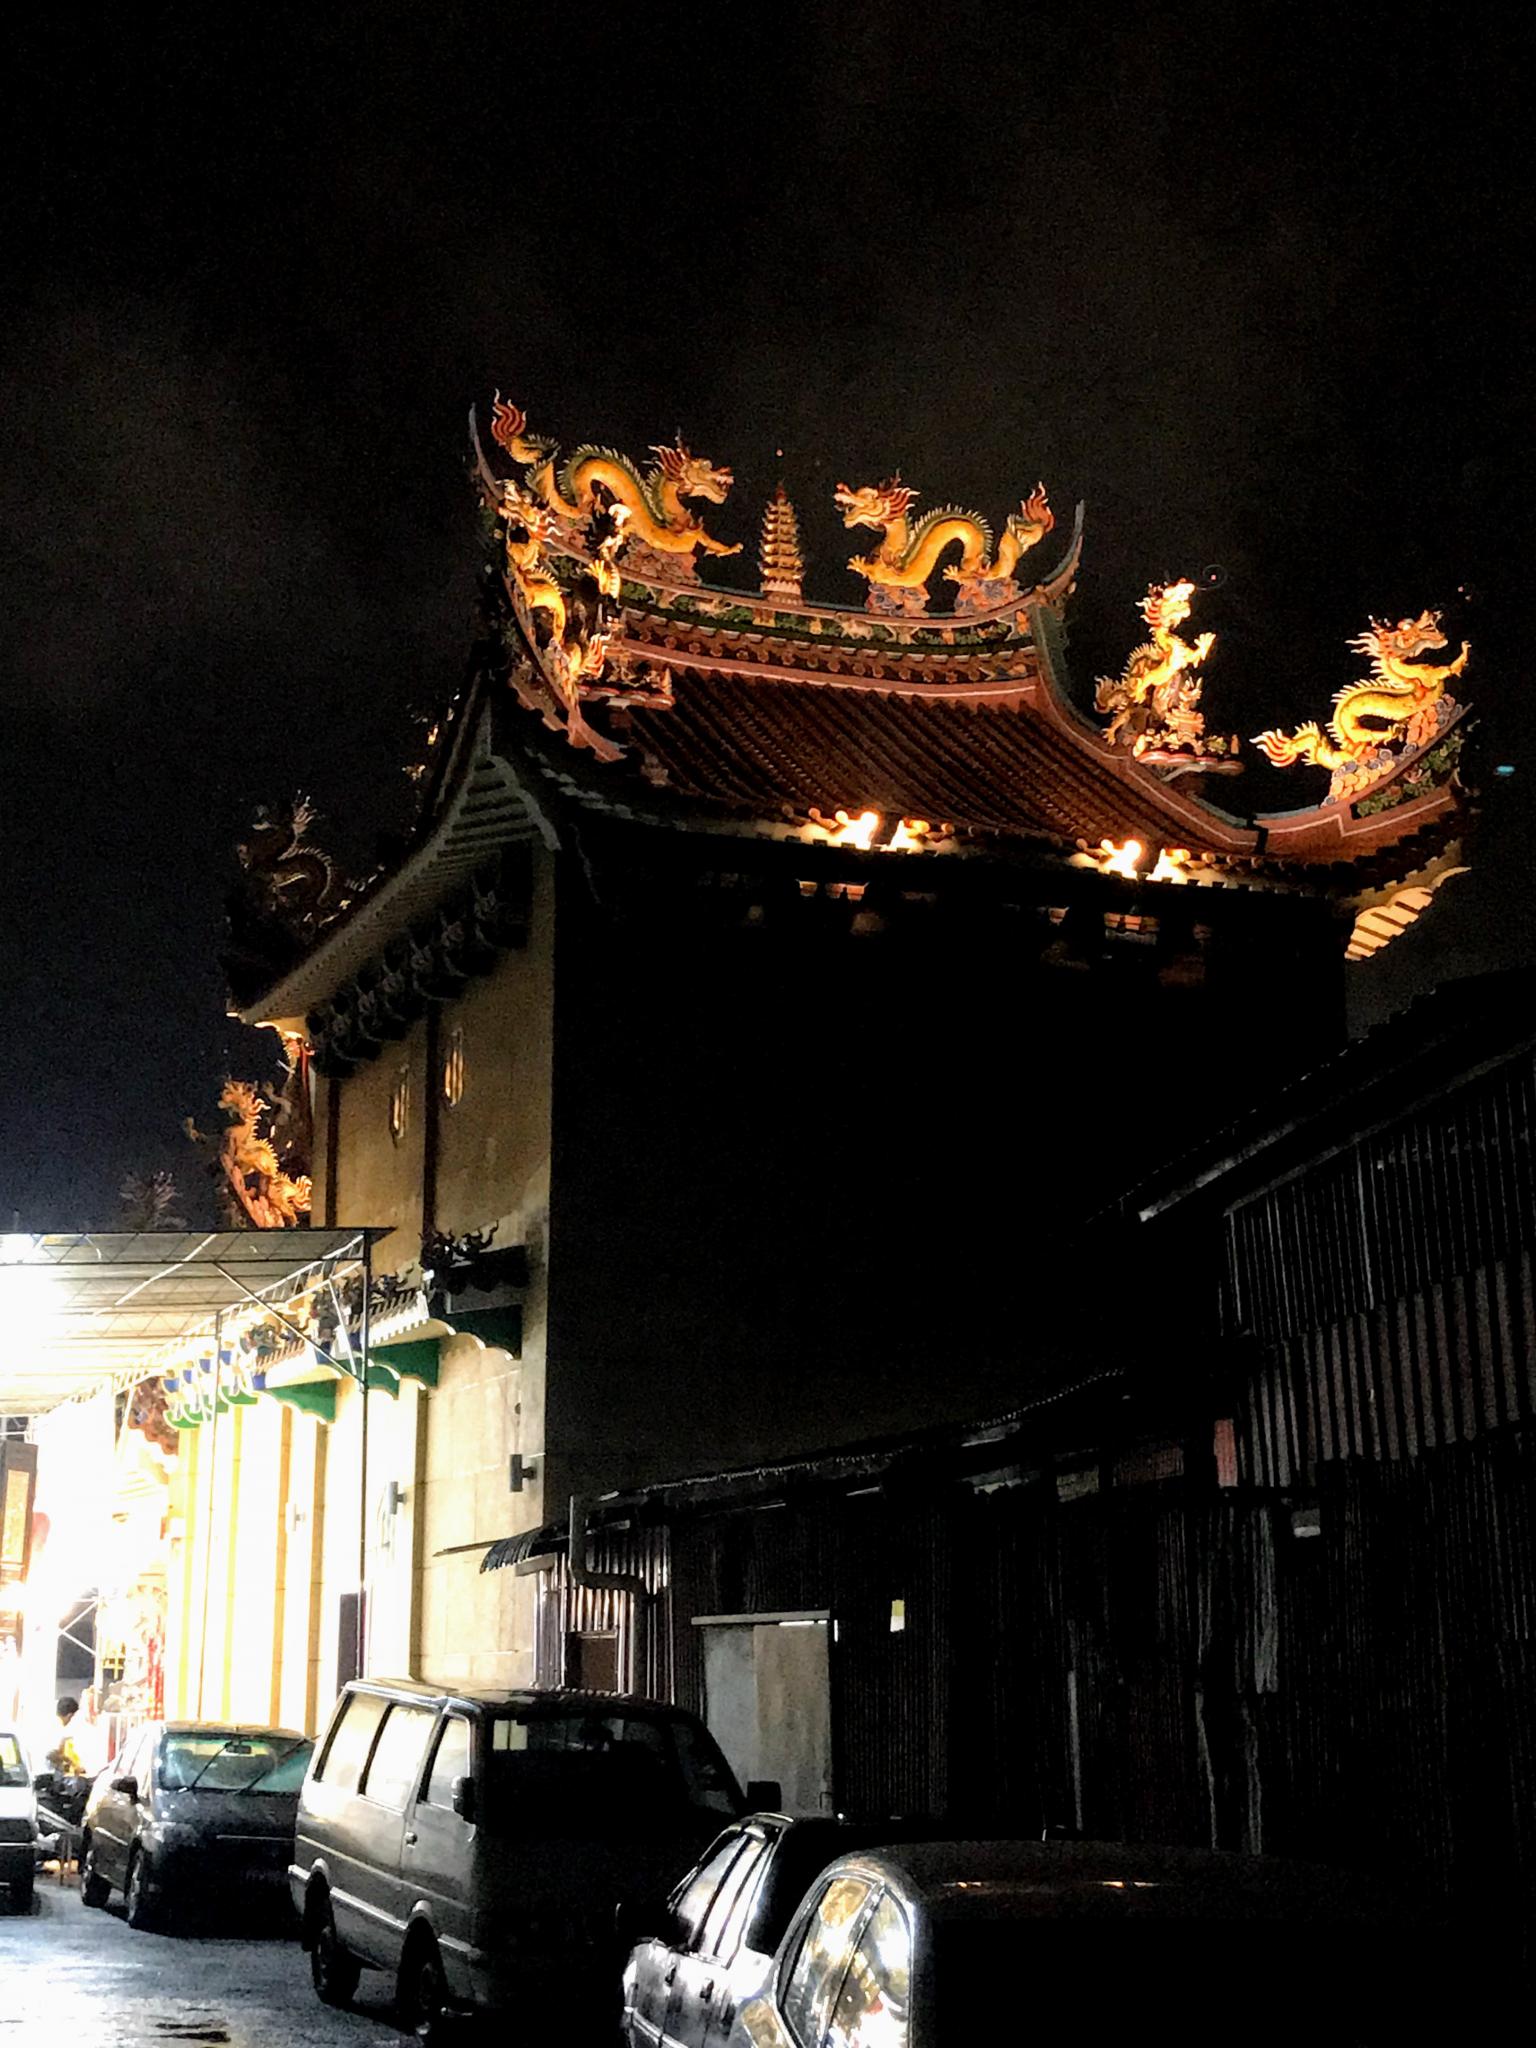 Post a photo a week, of anything/anywhere-penang-chinese-temple-night-jpg